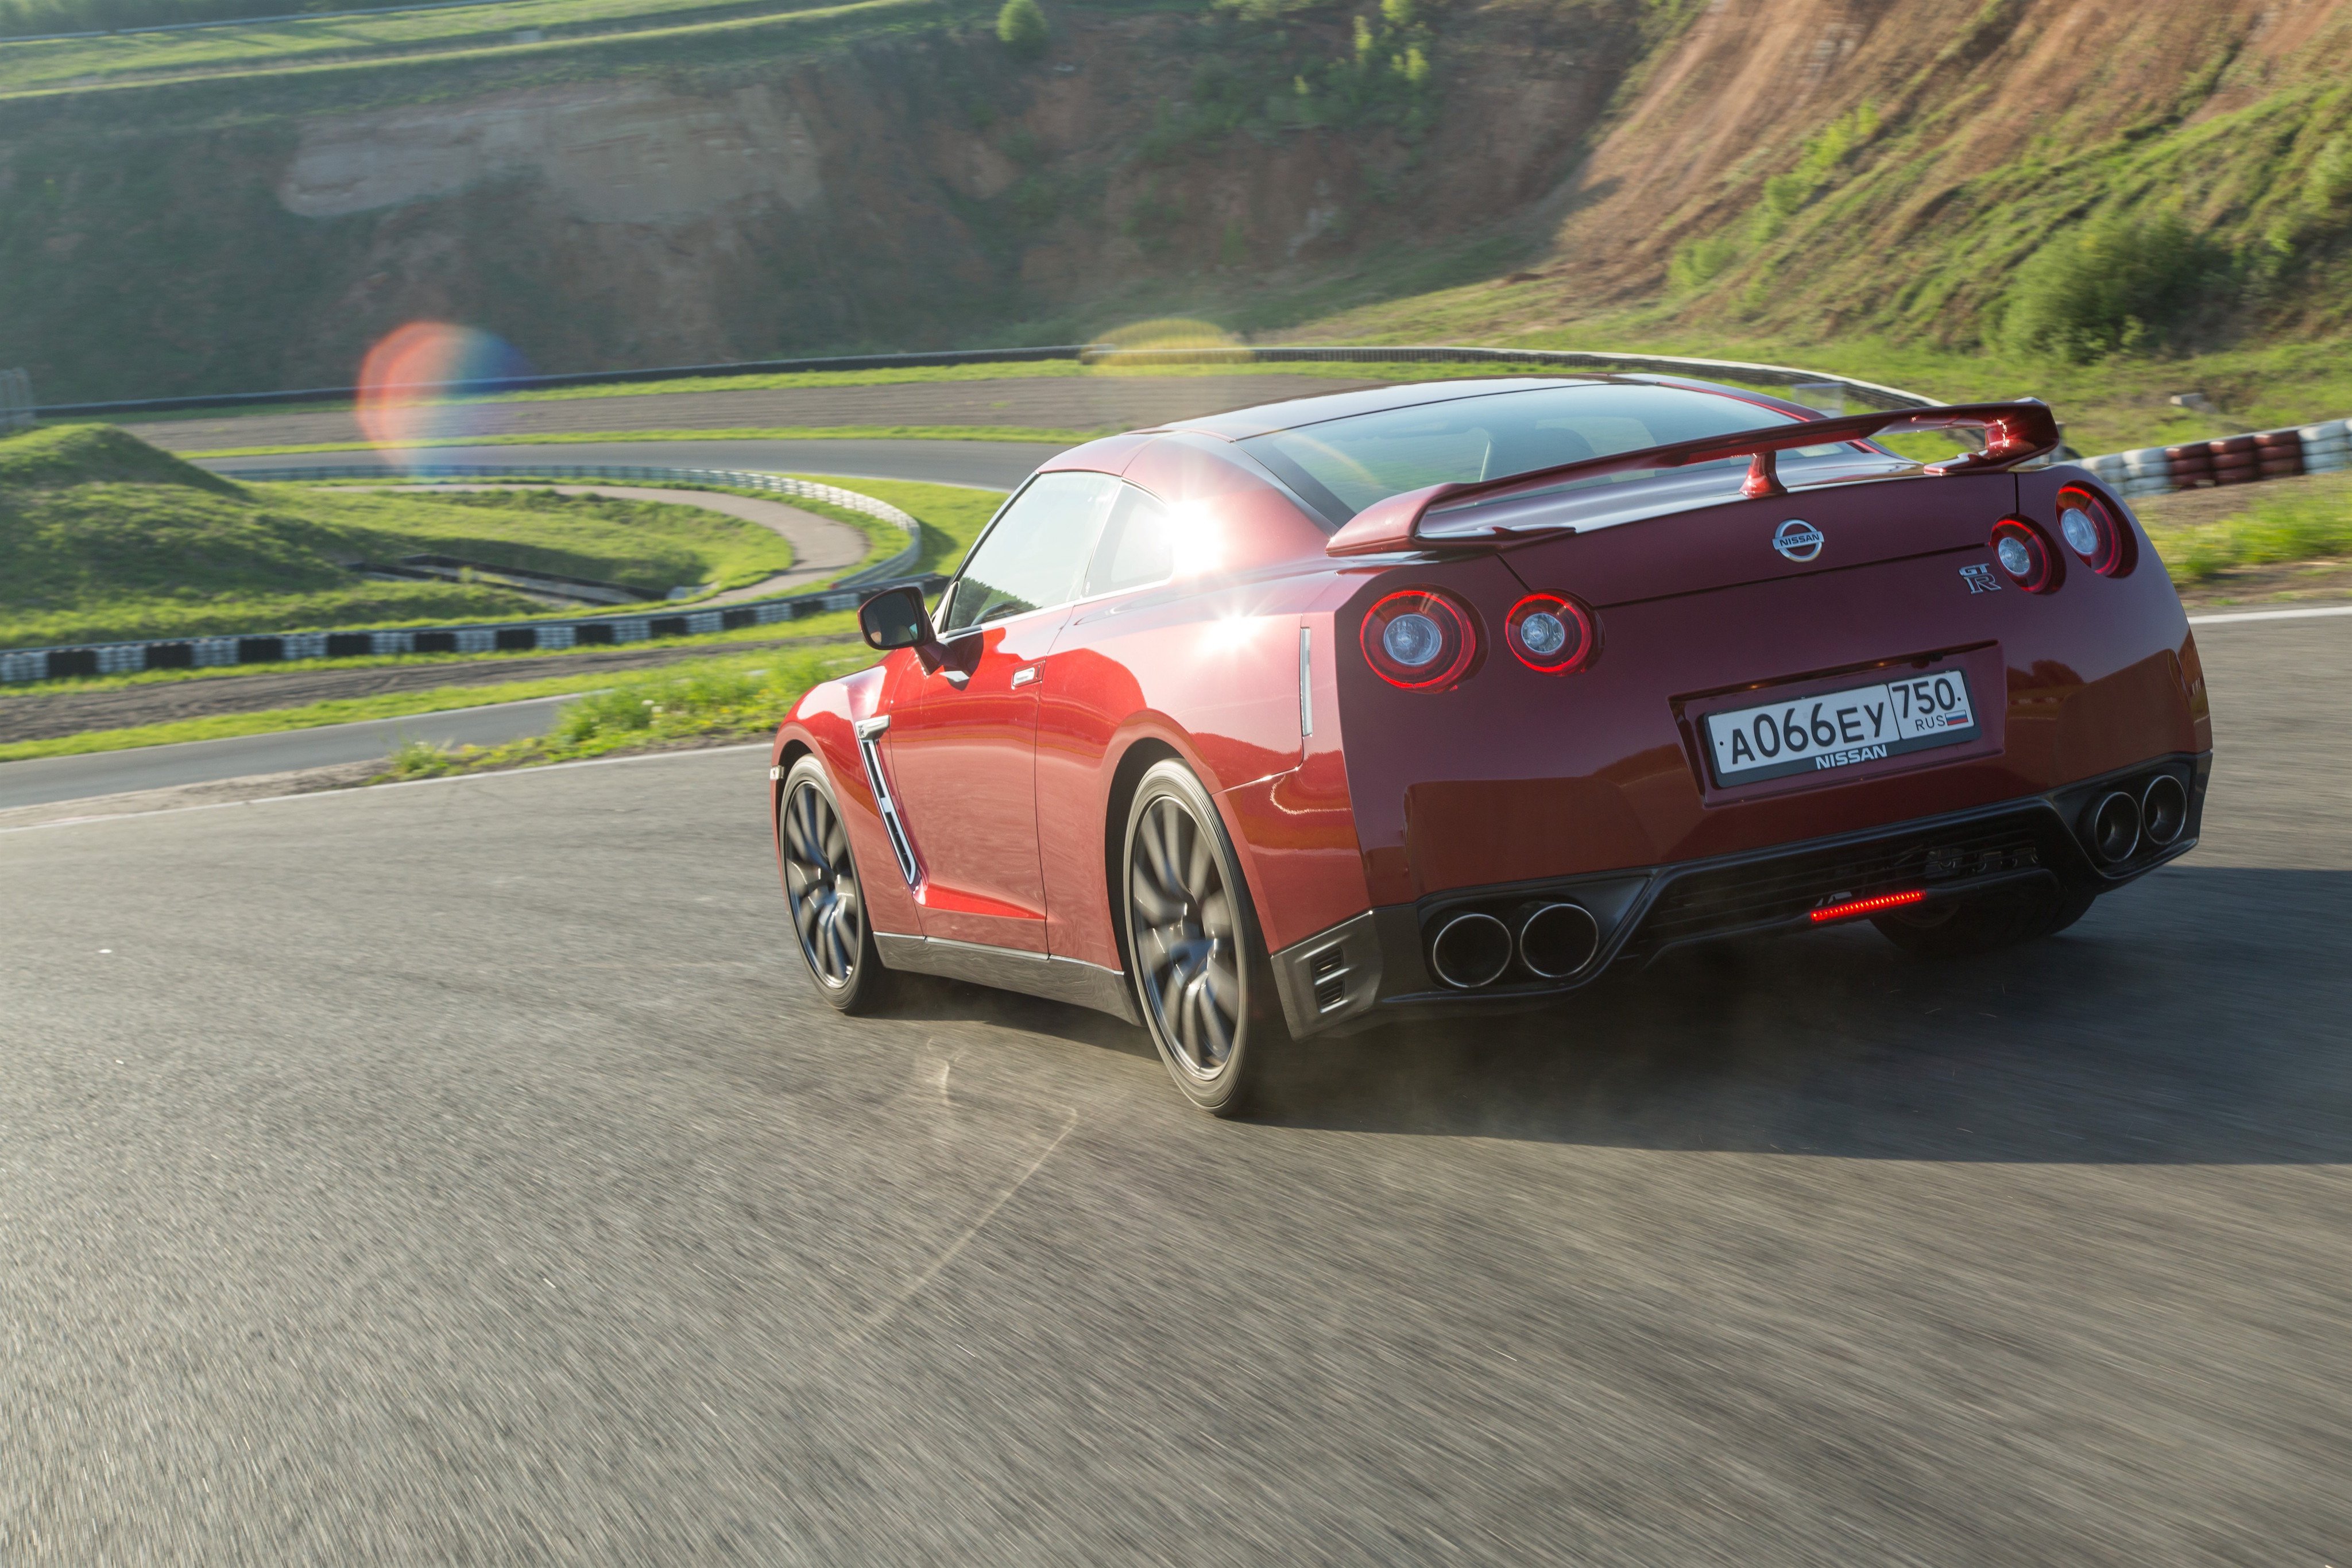 nissan, Gt r,  r35 , Cars, Coupe, 2014 Wallpaper